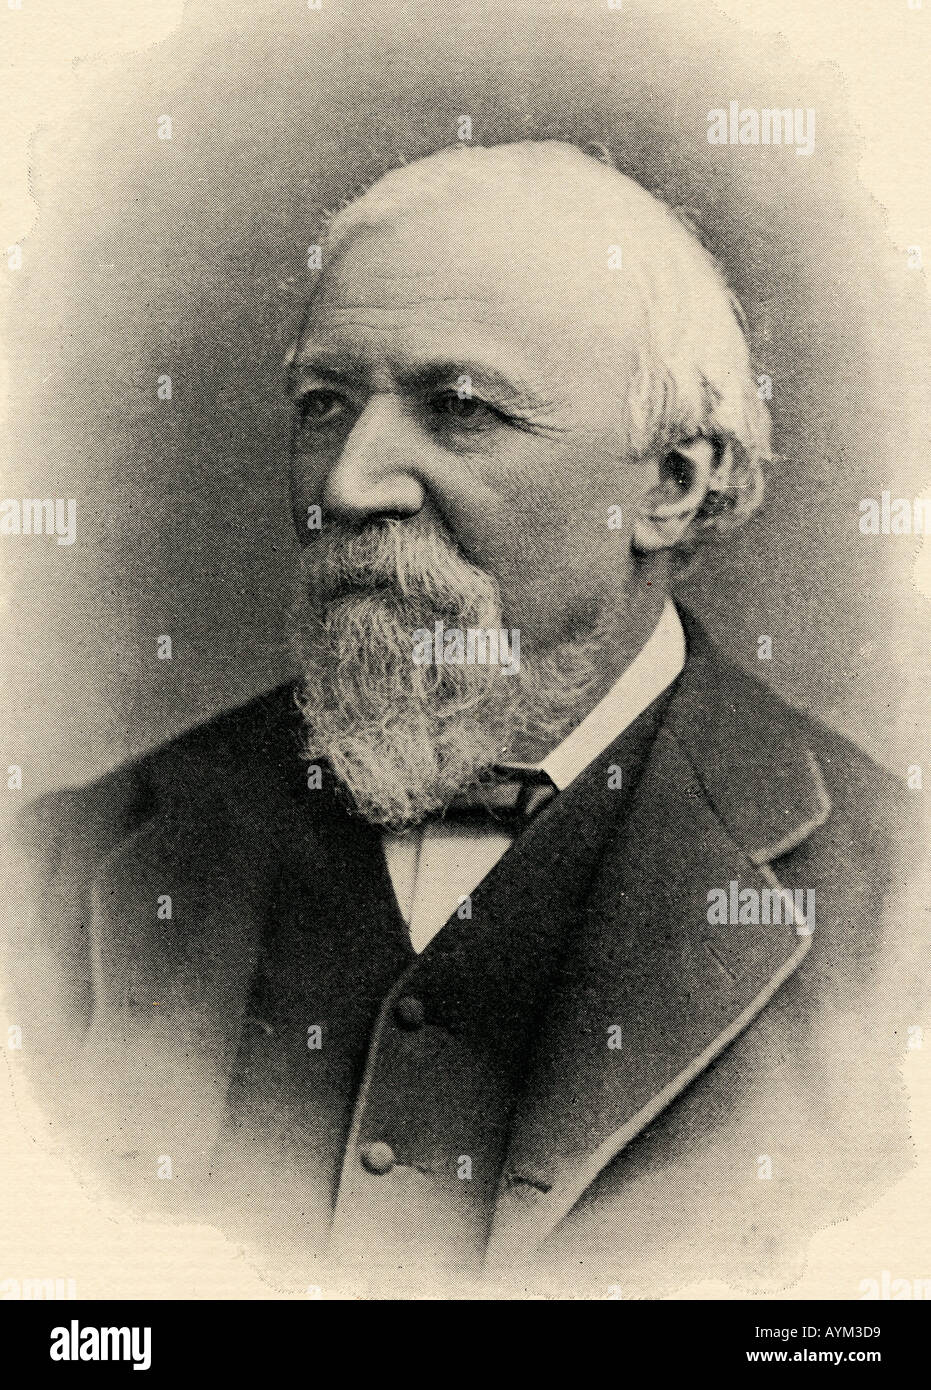 Robert Browning, 1812 - 1889. Poète anglais. Banque D'Images